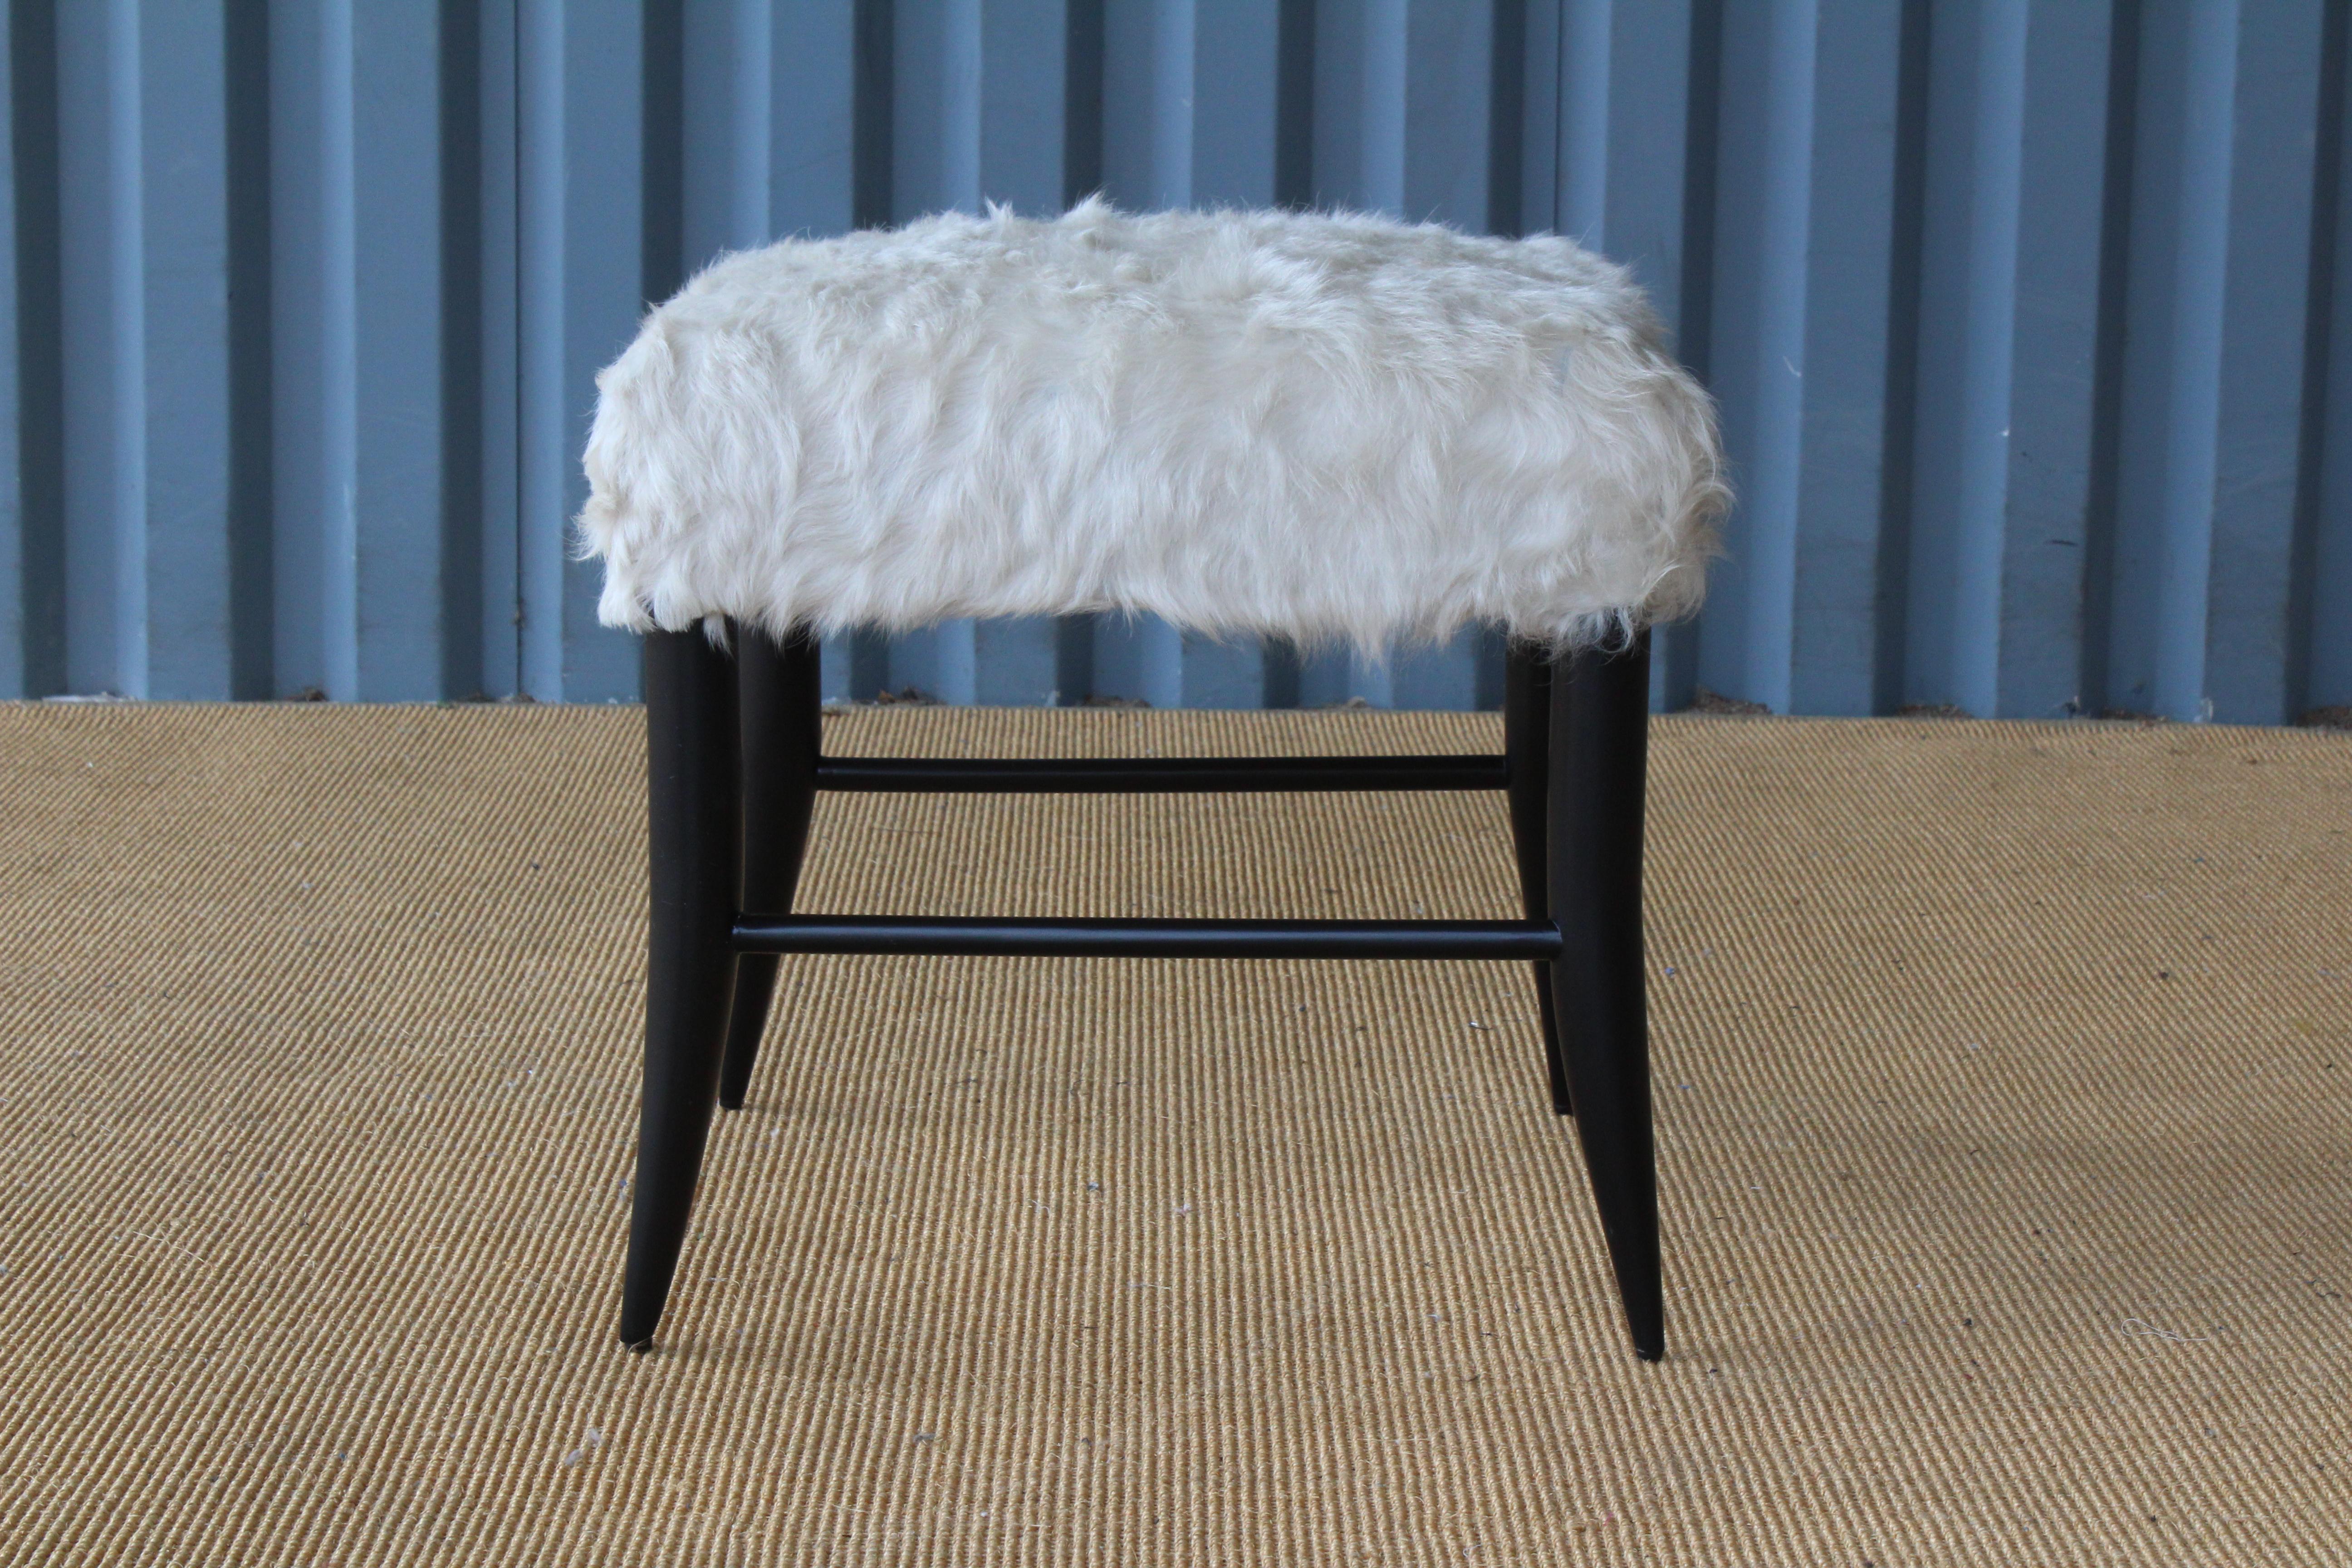 Custom made croft stools by Hollywood at Home. Ebonized base with an upholstered seat in white cowhide. Sold individually.